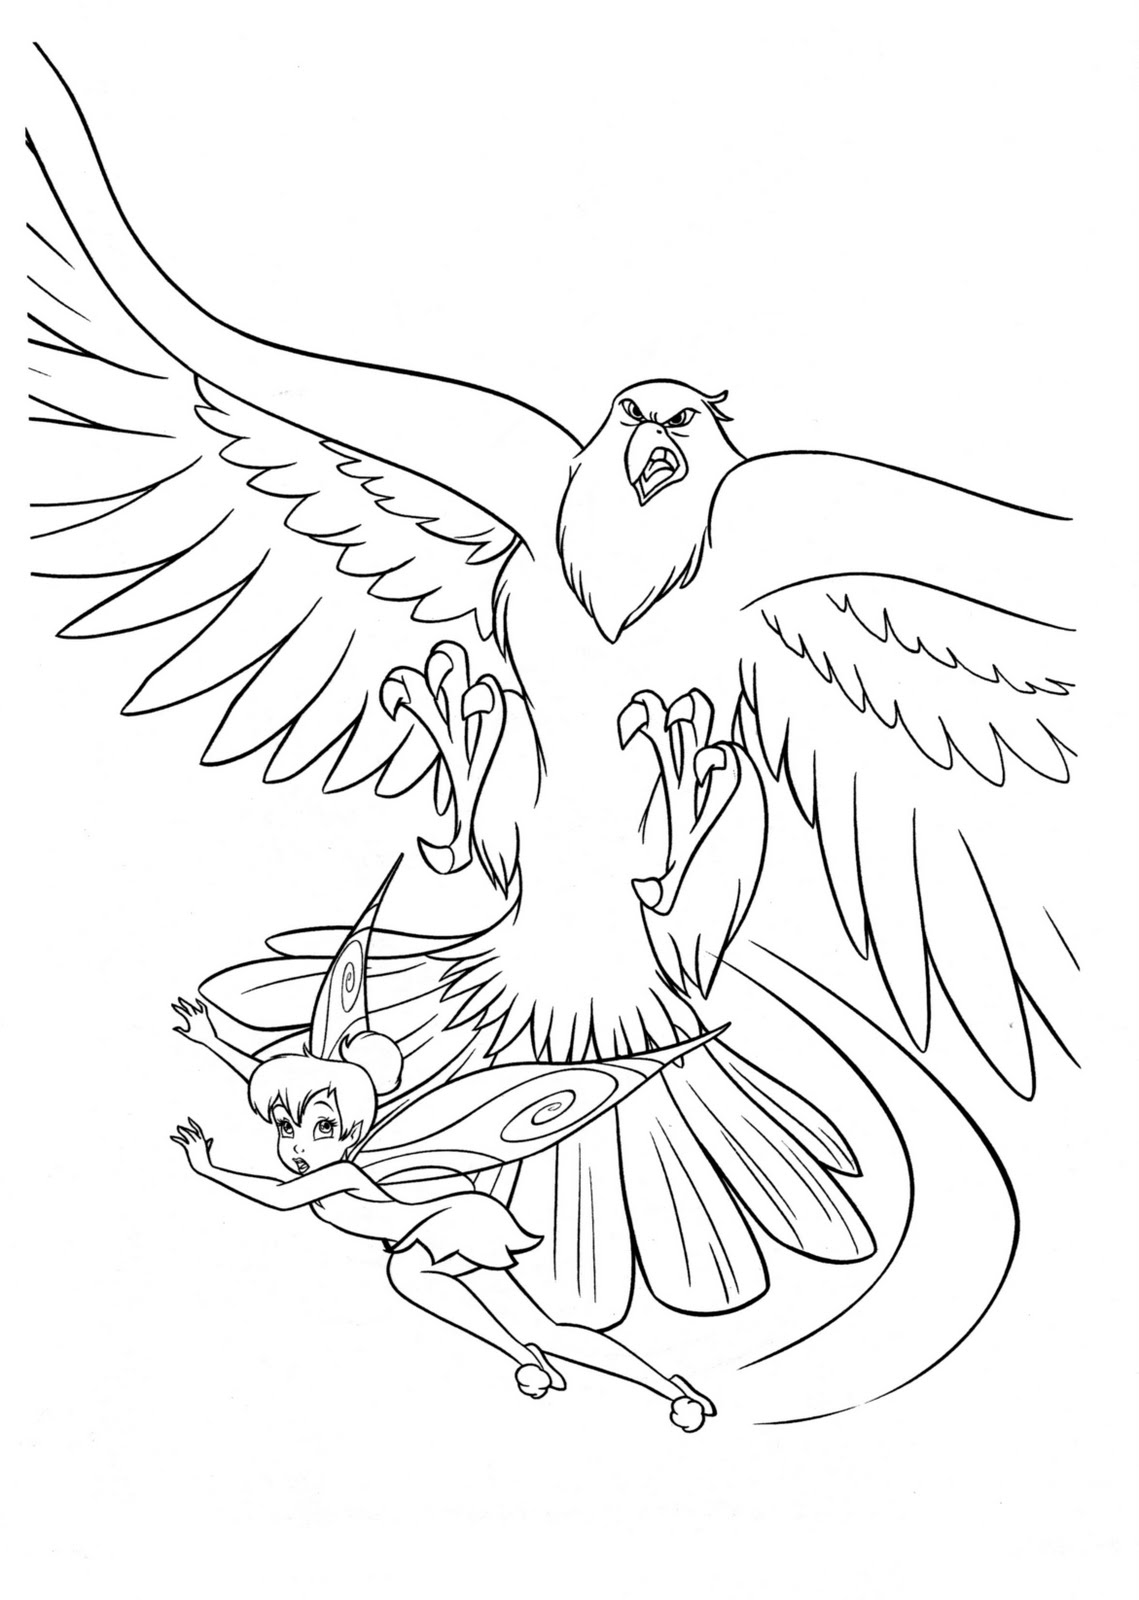 Tinkerbell Coloring Pages - An Eagle Attacks >> Disney Coloring Pages